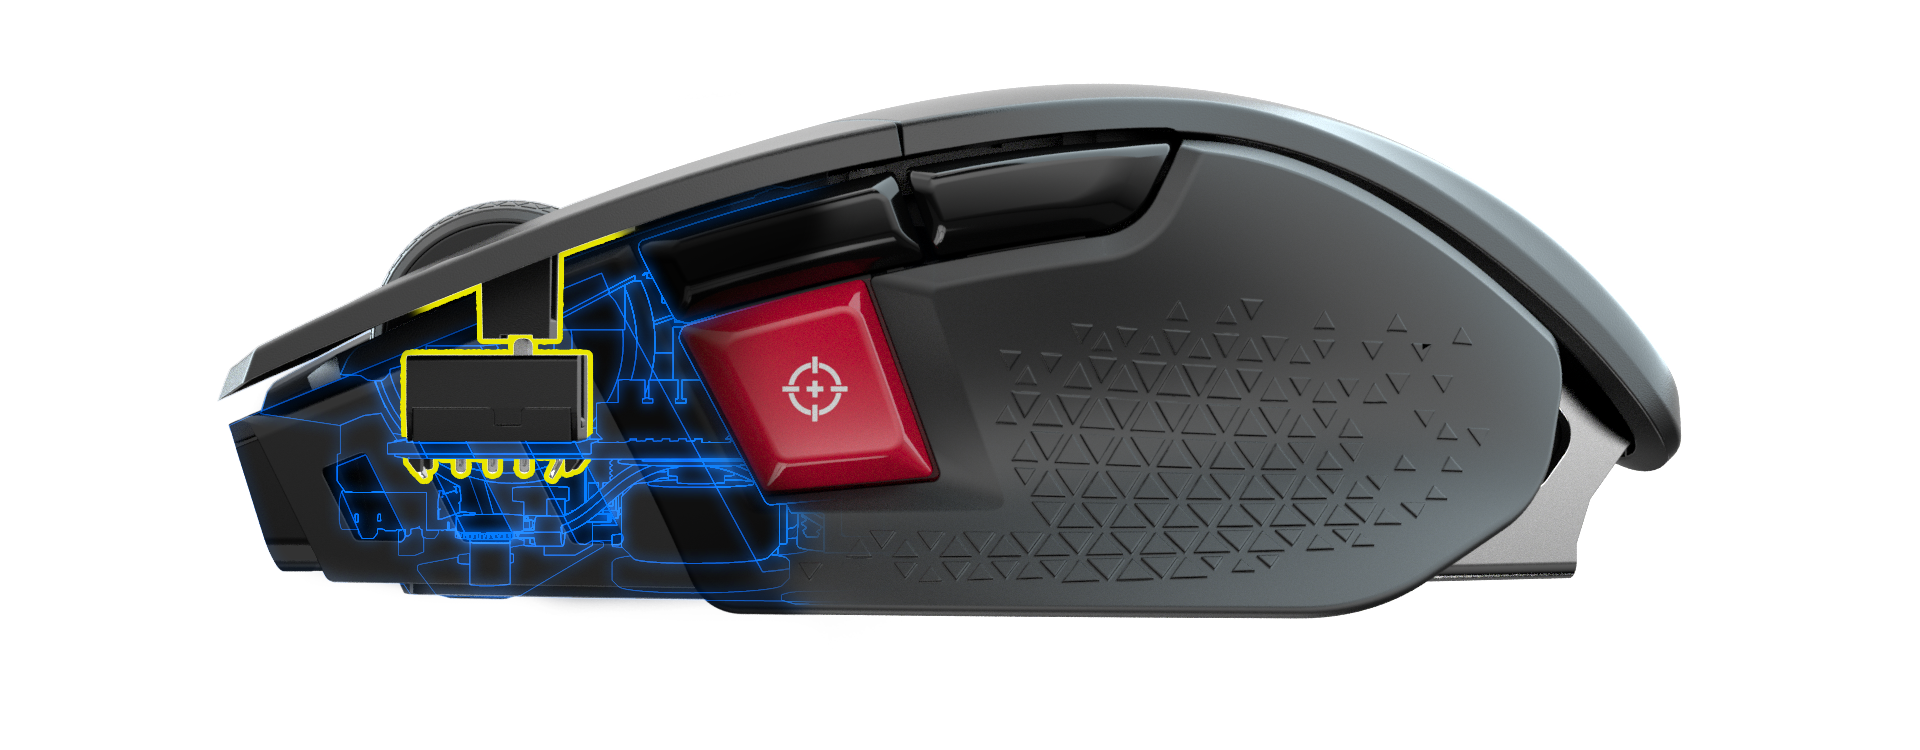 Berygtet kom videre guiden M65 RGB ULTRA WIRELESS Tunable FPS Gaming Mouse